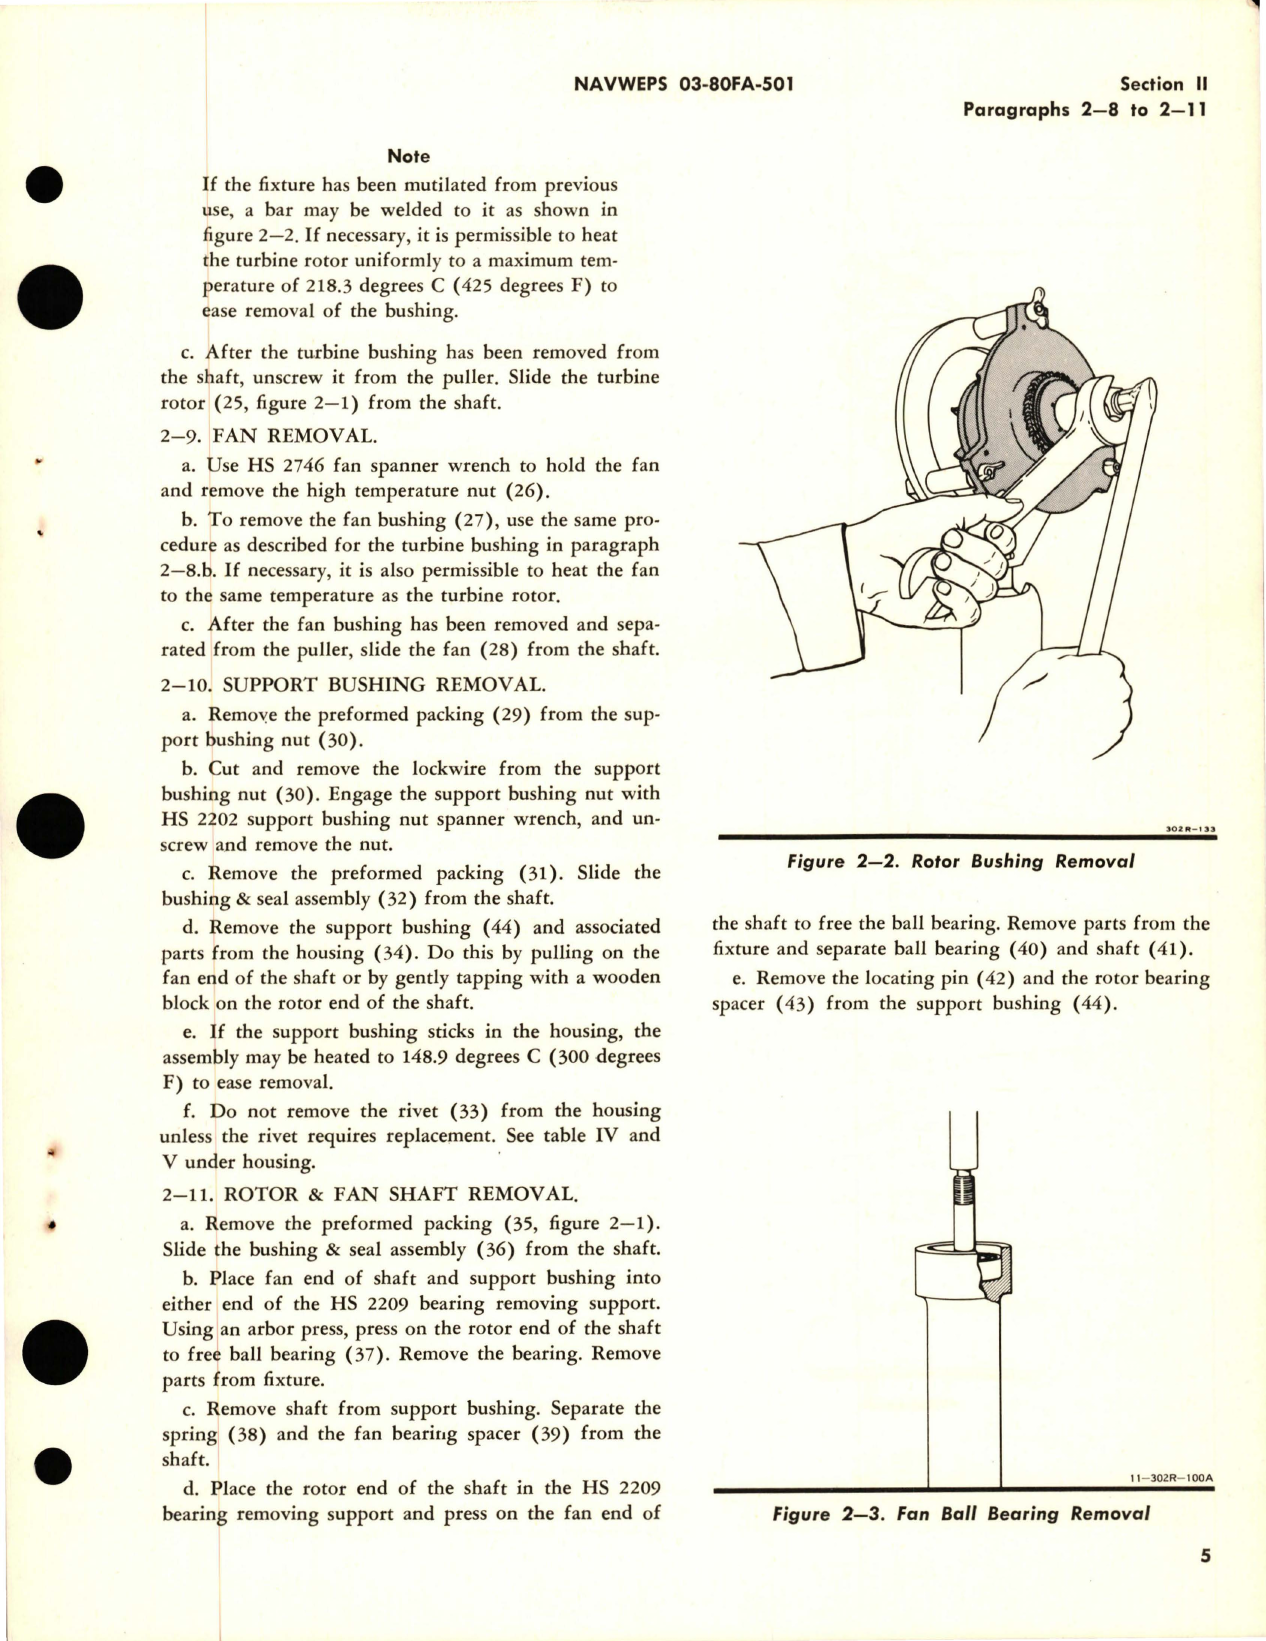 Sample page 9 from AirCorps Library document: Overhaul Instructions for Turbine Fan Assembly - Part 98821